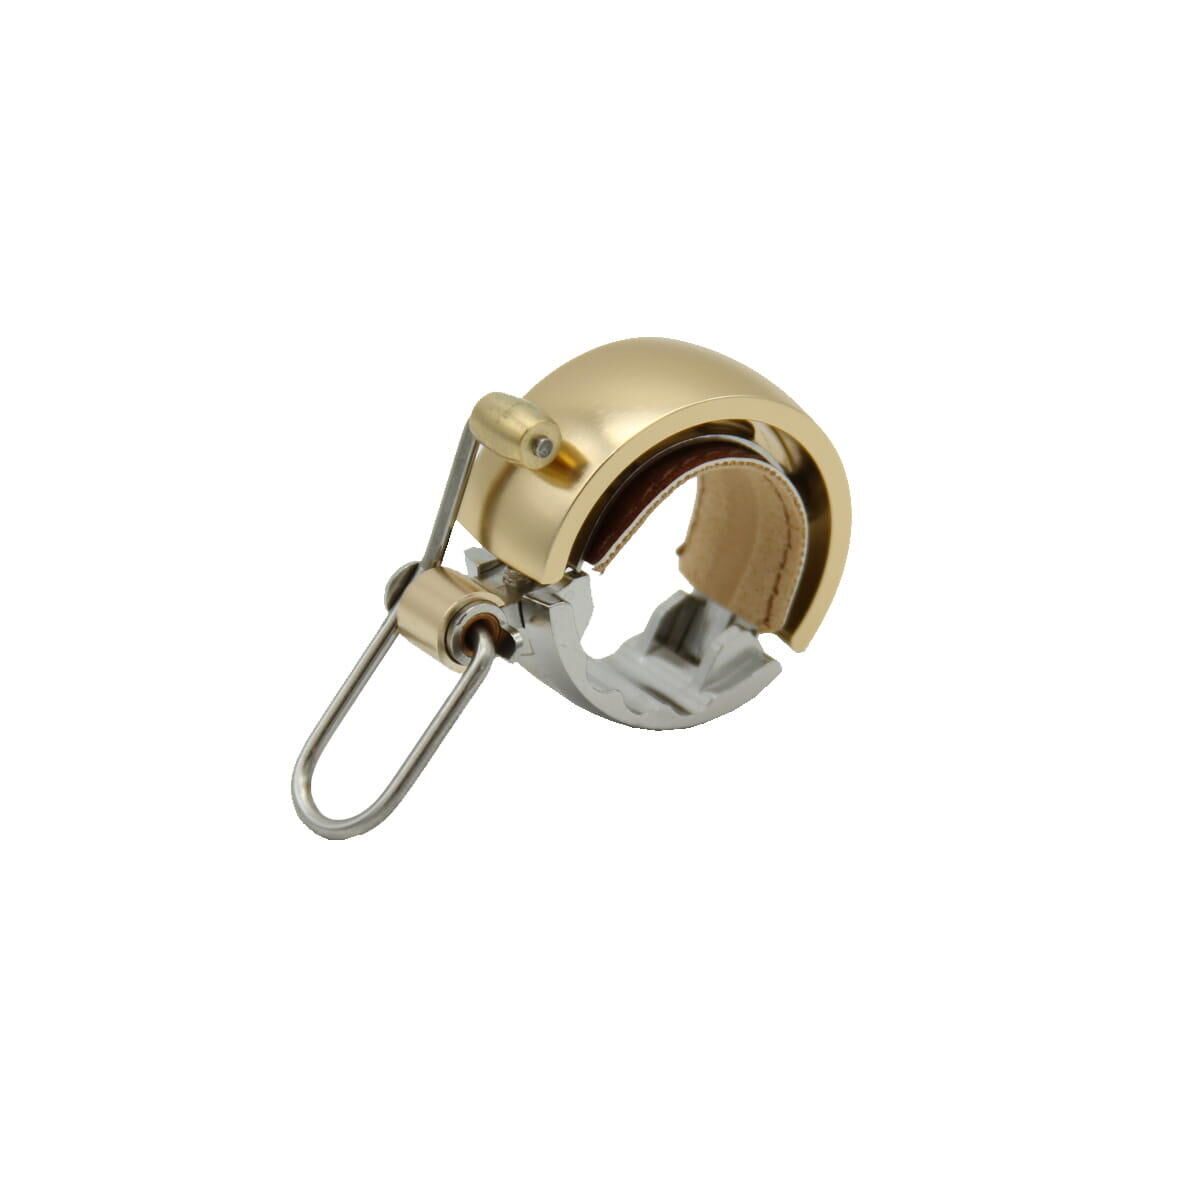 KNOG Knog Oi Luxe Bicycle Bell Small Brass